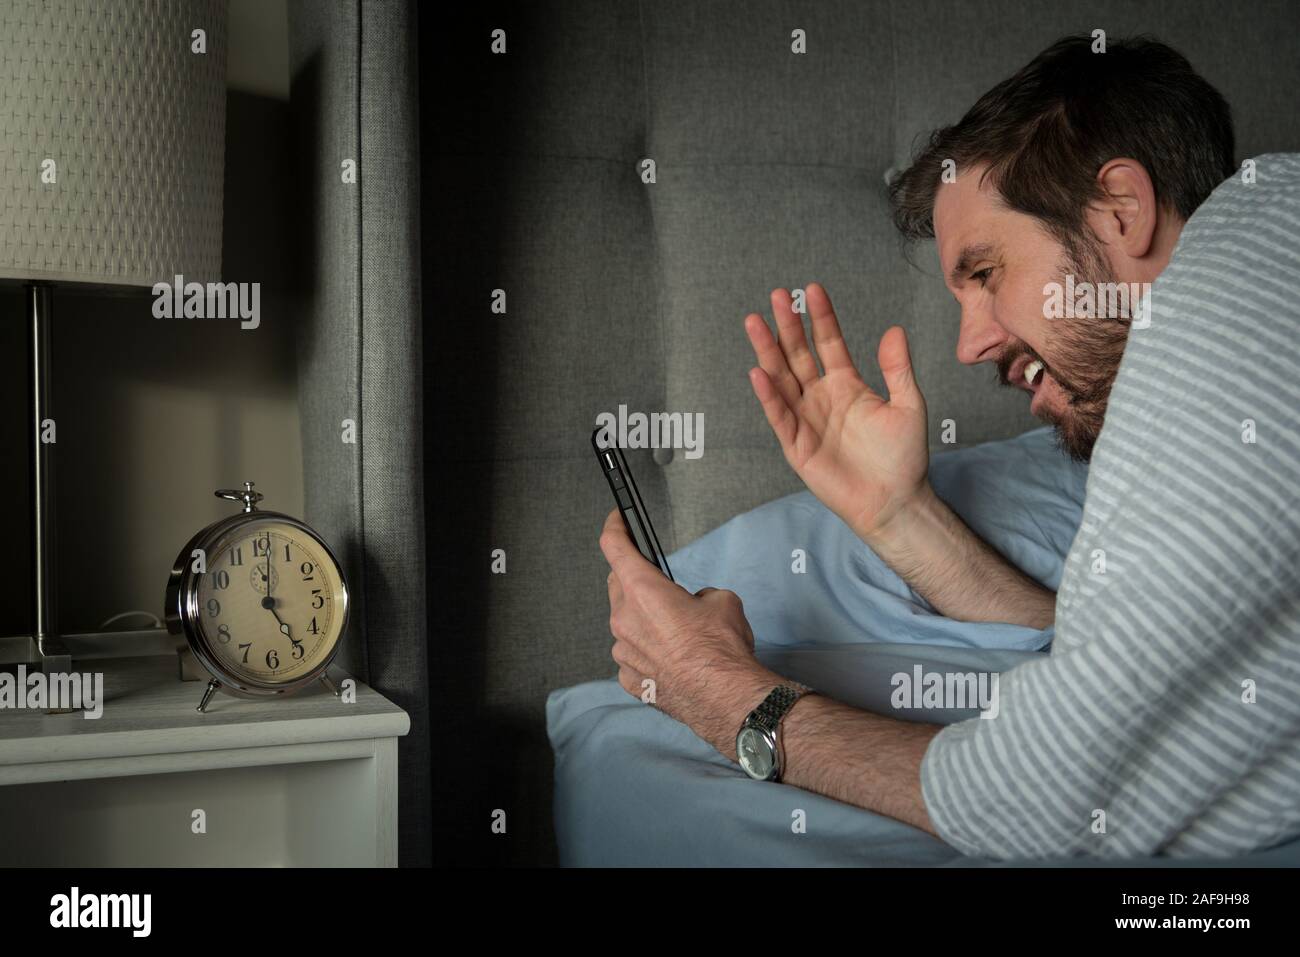 Man reacting to morning news on his smart phone device. Stock Photo